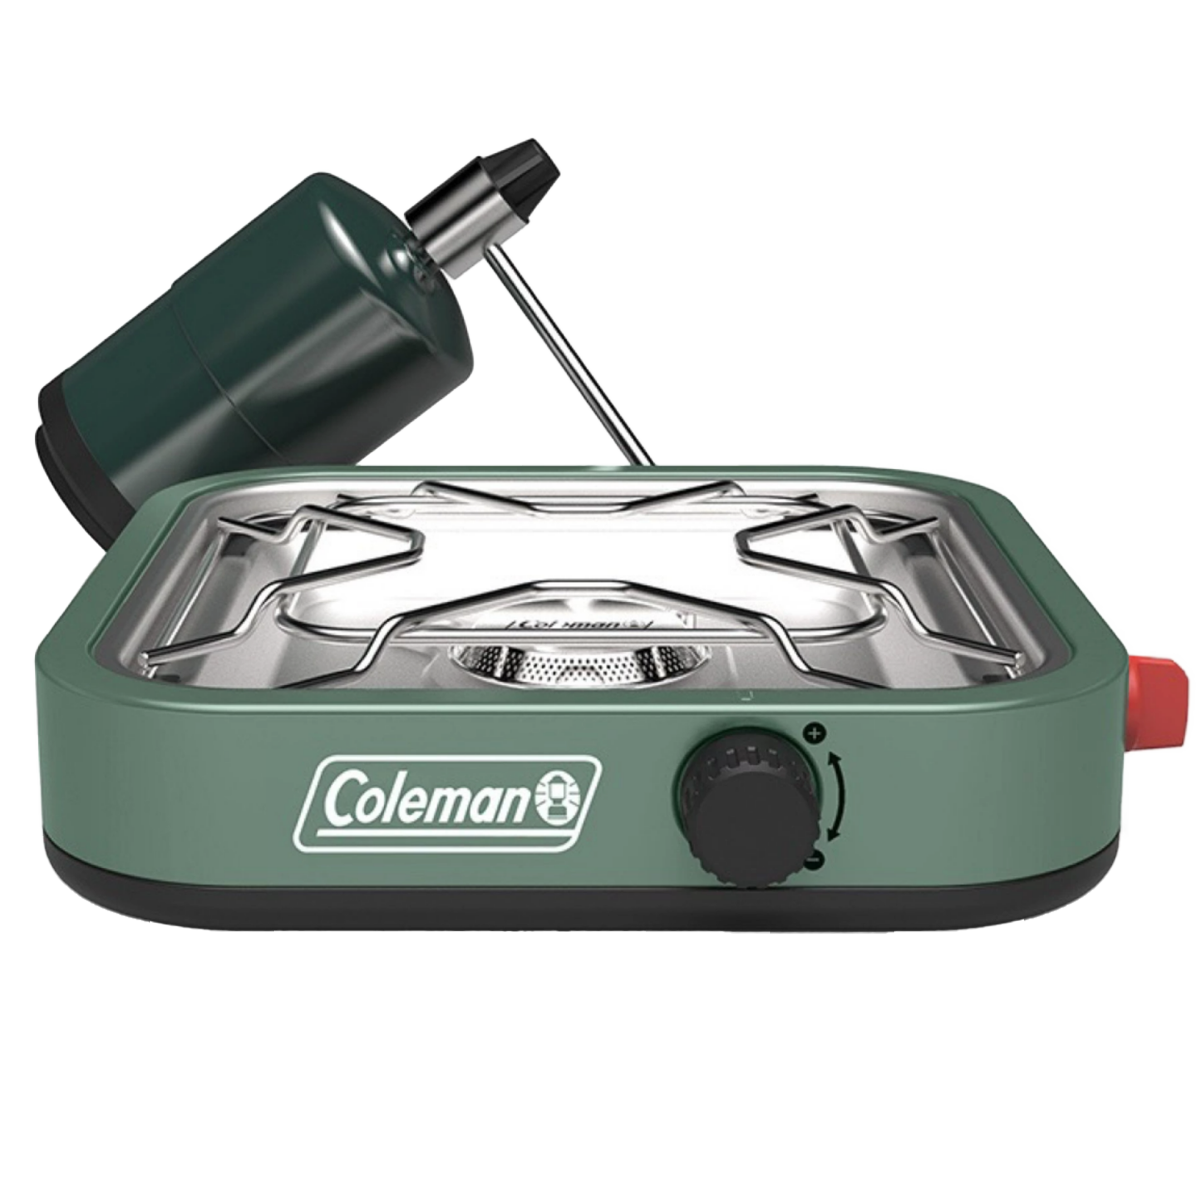 Coleman 1-Burner Propane Electronic Steel Outdoor Stove in the